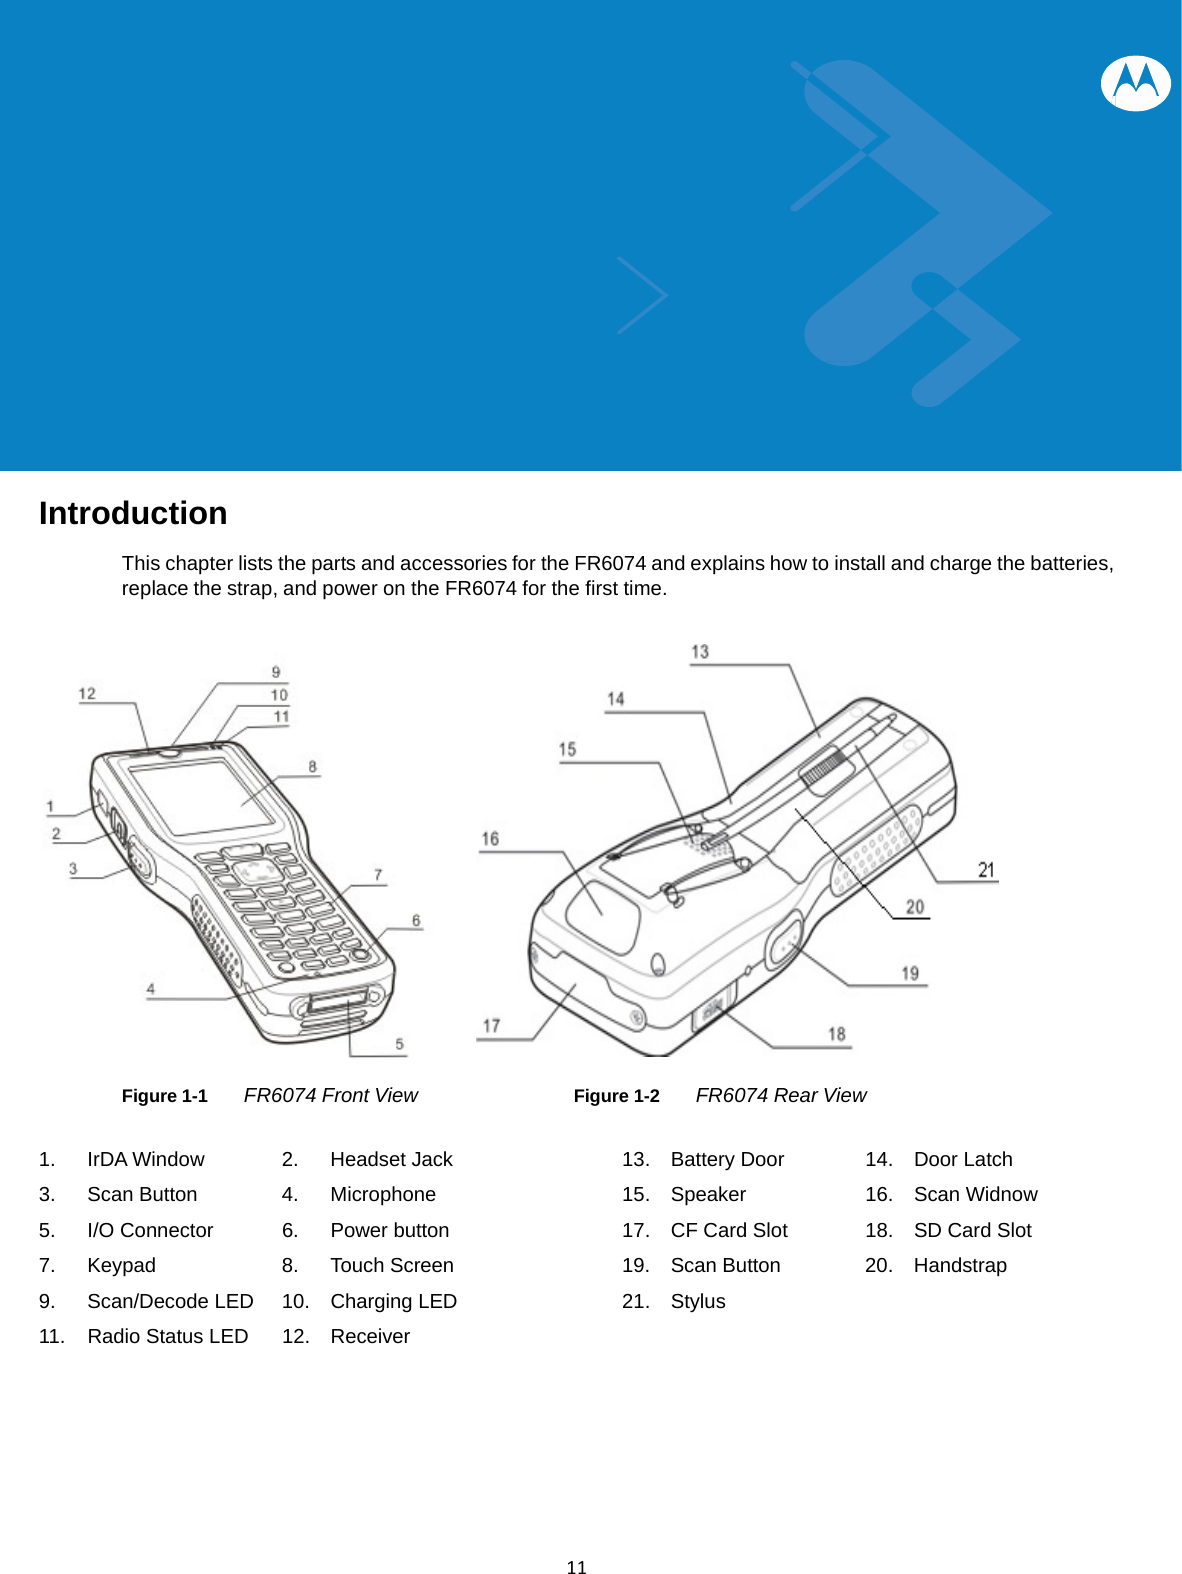  11Chapter 1 Getting Started            Introduction  This chapter lists the parts and accessories for the FR6074 and explains how to install and charge the batteries, replace the strap, and power on the FR6074 for the first time.                                            Figure 1-1      FR6074 Front View    Figure 1-2    FR6074 Rear View   1.  IrDA Window     2.  Headset Jack              13.  Battery Door     14.  Door Latch 3. Scan Button    4. Microphone    15. Speaker    16. Scan Widnow  5. I/O Connector   6. Power button    17. CF Card Slot  18. SD Card Slot 7.  Keypad          8.  Touch Screen        19.  Scan Button     20.  Handstrap  9. Scan/Decode LED   10. Charging LED    21. Stylus     11. Radio Status LED 12.  Receiver                        